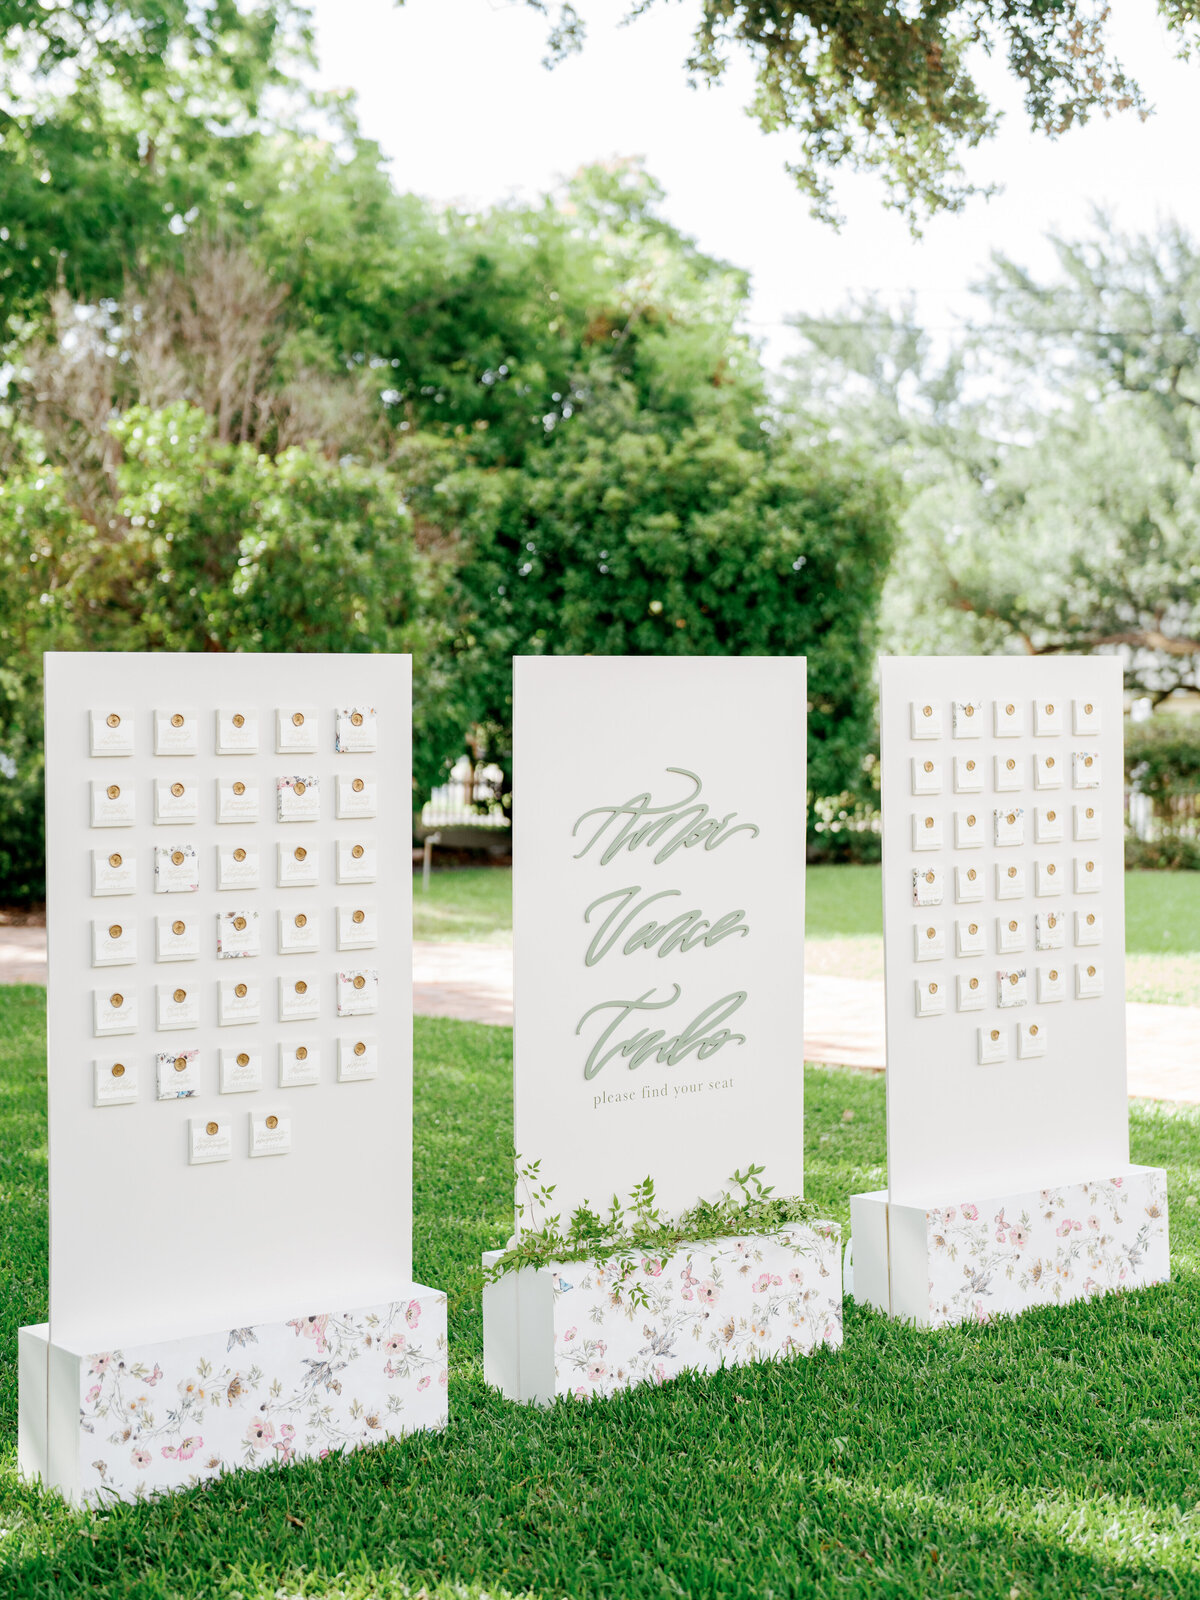 LBV Design House Wedding Design Planning Day-Of Signage Paper Goods Shoppable Accessories Wedding Day Austin, Texas beyond Valerie Strenk Lettered by Valerie Hand Lettering10